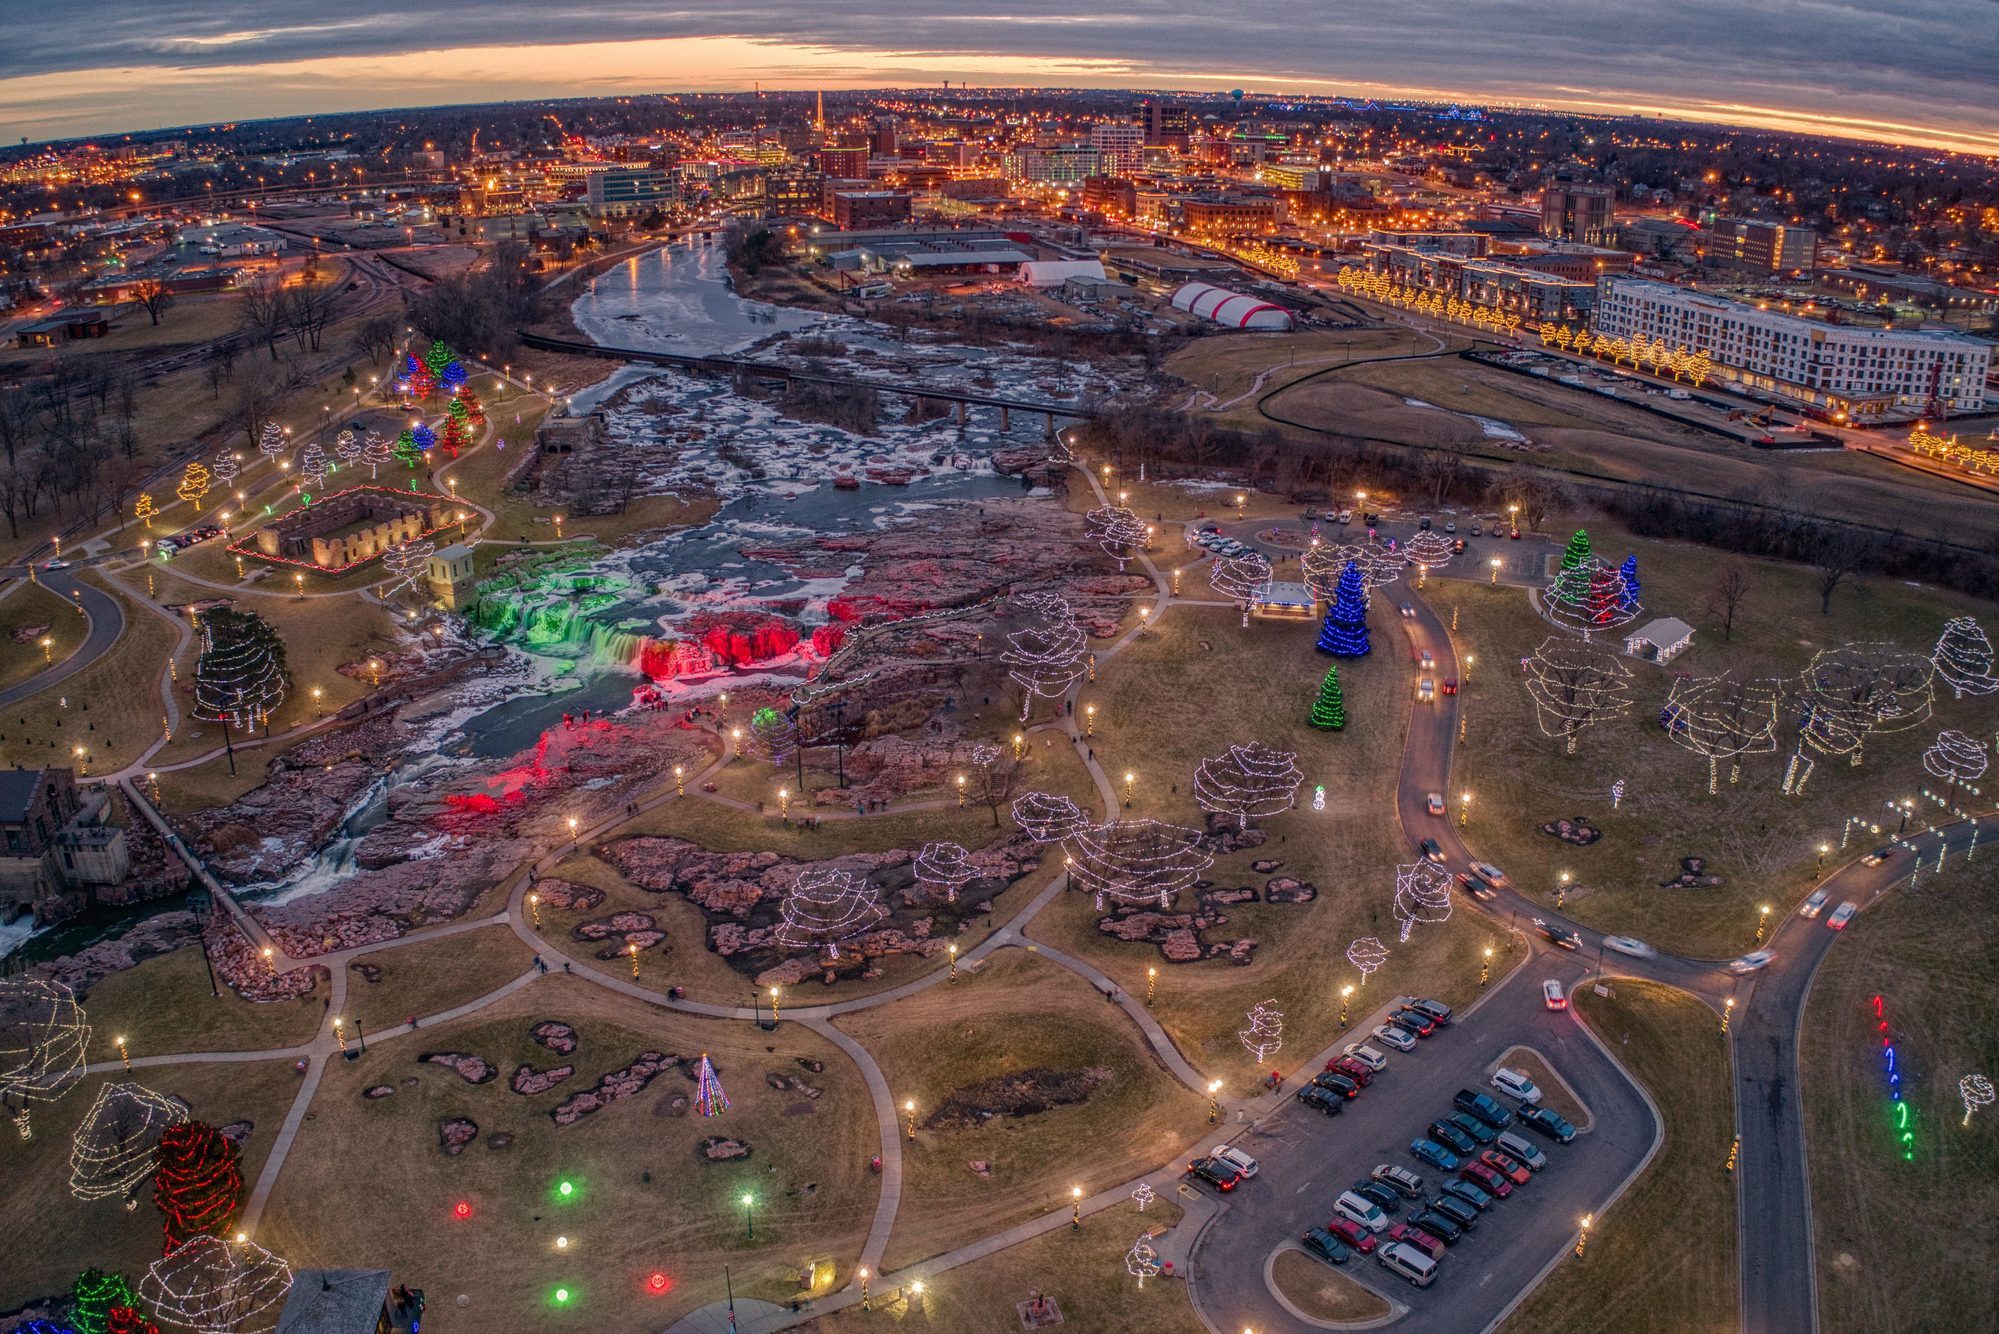 <p><strong>Best for:</strong> Waterfall chasers</p> <p>Gorgeous waterfalls of tumbling icy water in the Big Sioux River illuminated by over 355,000 colored lights is the highlight of the Christmas season in Falls Park—a Winter Wonderland fit for Santa himself. But that's not all the city has to offer: Downtown Sioux Falls also gets the holiday decorating treatment with a Parade of Lights and tree lighting, the town's thriving entertainment scene offers holiday musical and stage performances. There are plenty of outdoor winter activities in the area as well, including skiing, snow tubing, snowshoeing, and ice skating.</p> <p>A stay downtown at Hotel on Phillips allows visitors to walk to many area holiday attractions, bars, and restaurants and offers amazing views over the river. The hotel, which features an art deco style, plays up the building's history as an early 1900s bank with the original 16-ton vault door as the entrance to the lounge.</p> <p class="listicle-page__cta-button-shop"><a class="shop-btn" href="https://www.tripadvisor.com/Hotel_Review-g54805-d17761445-Reviews-Hotel_on_Phillips-Sioux_Falls_South_Dakota.html#REVIEWS">Book Now</a></p>